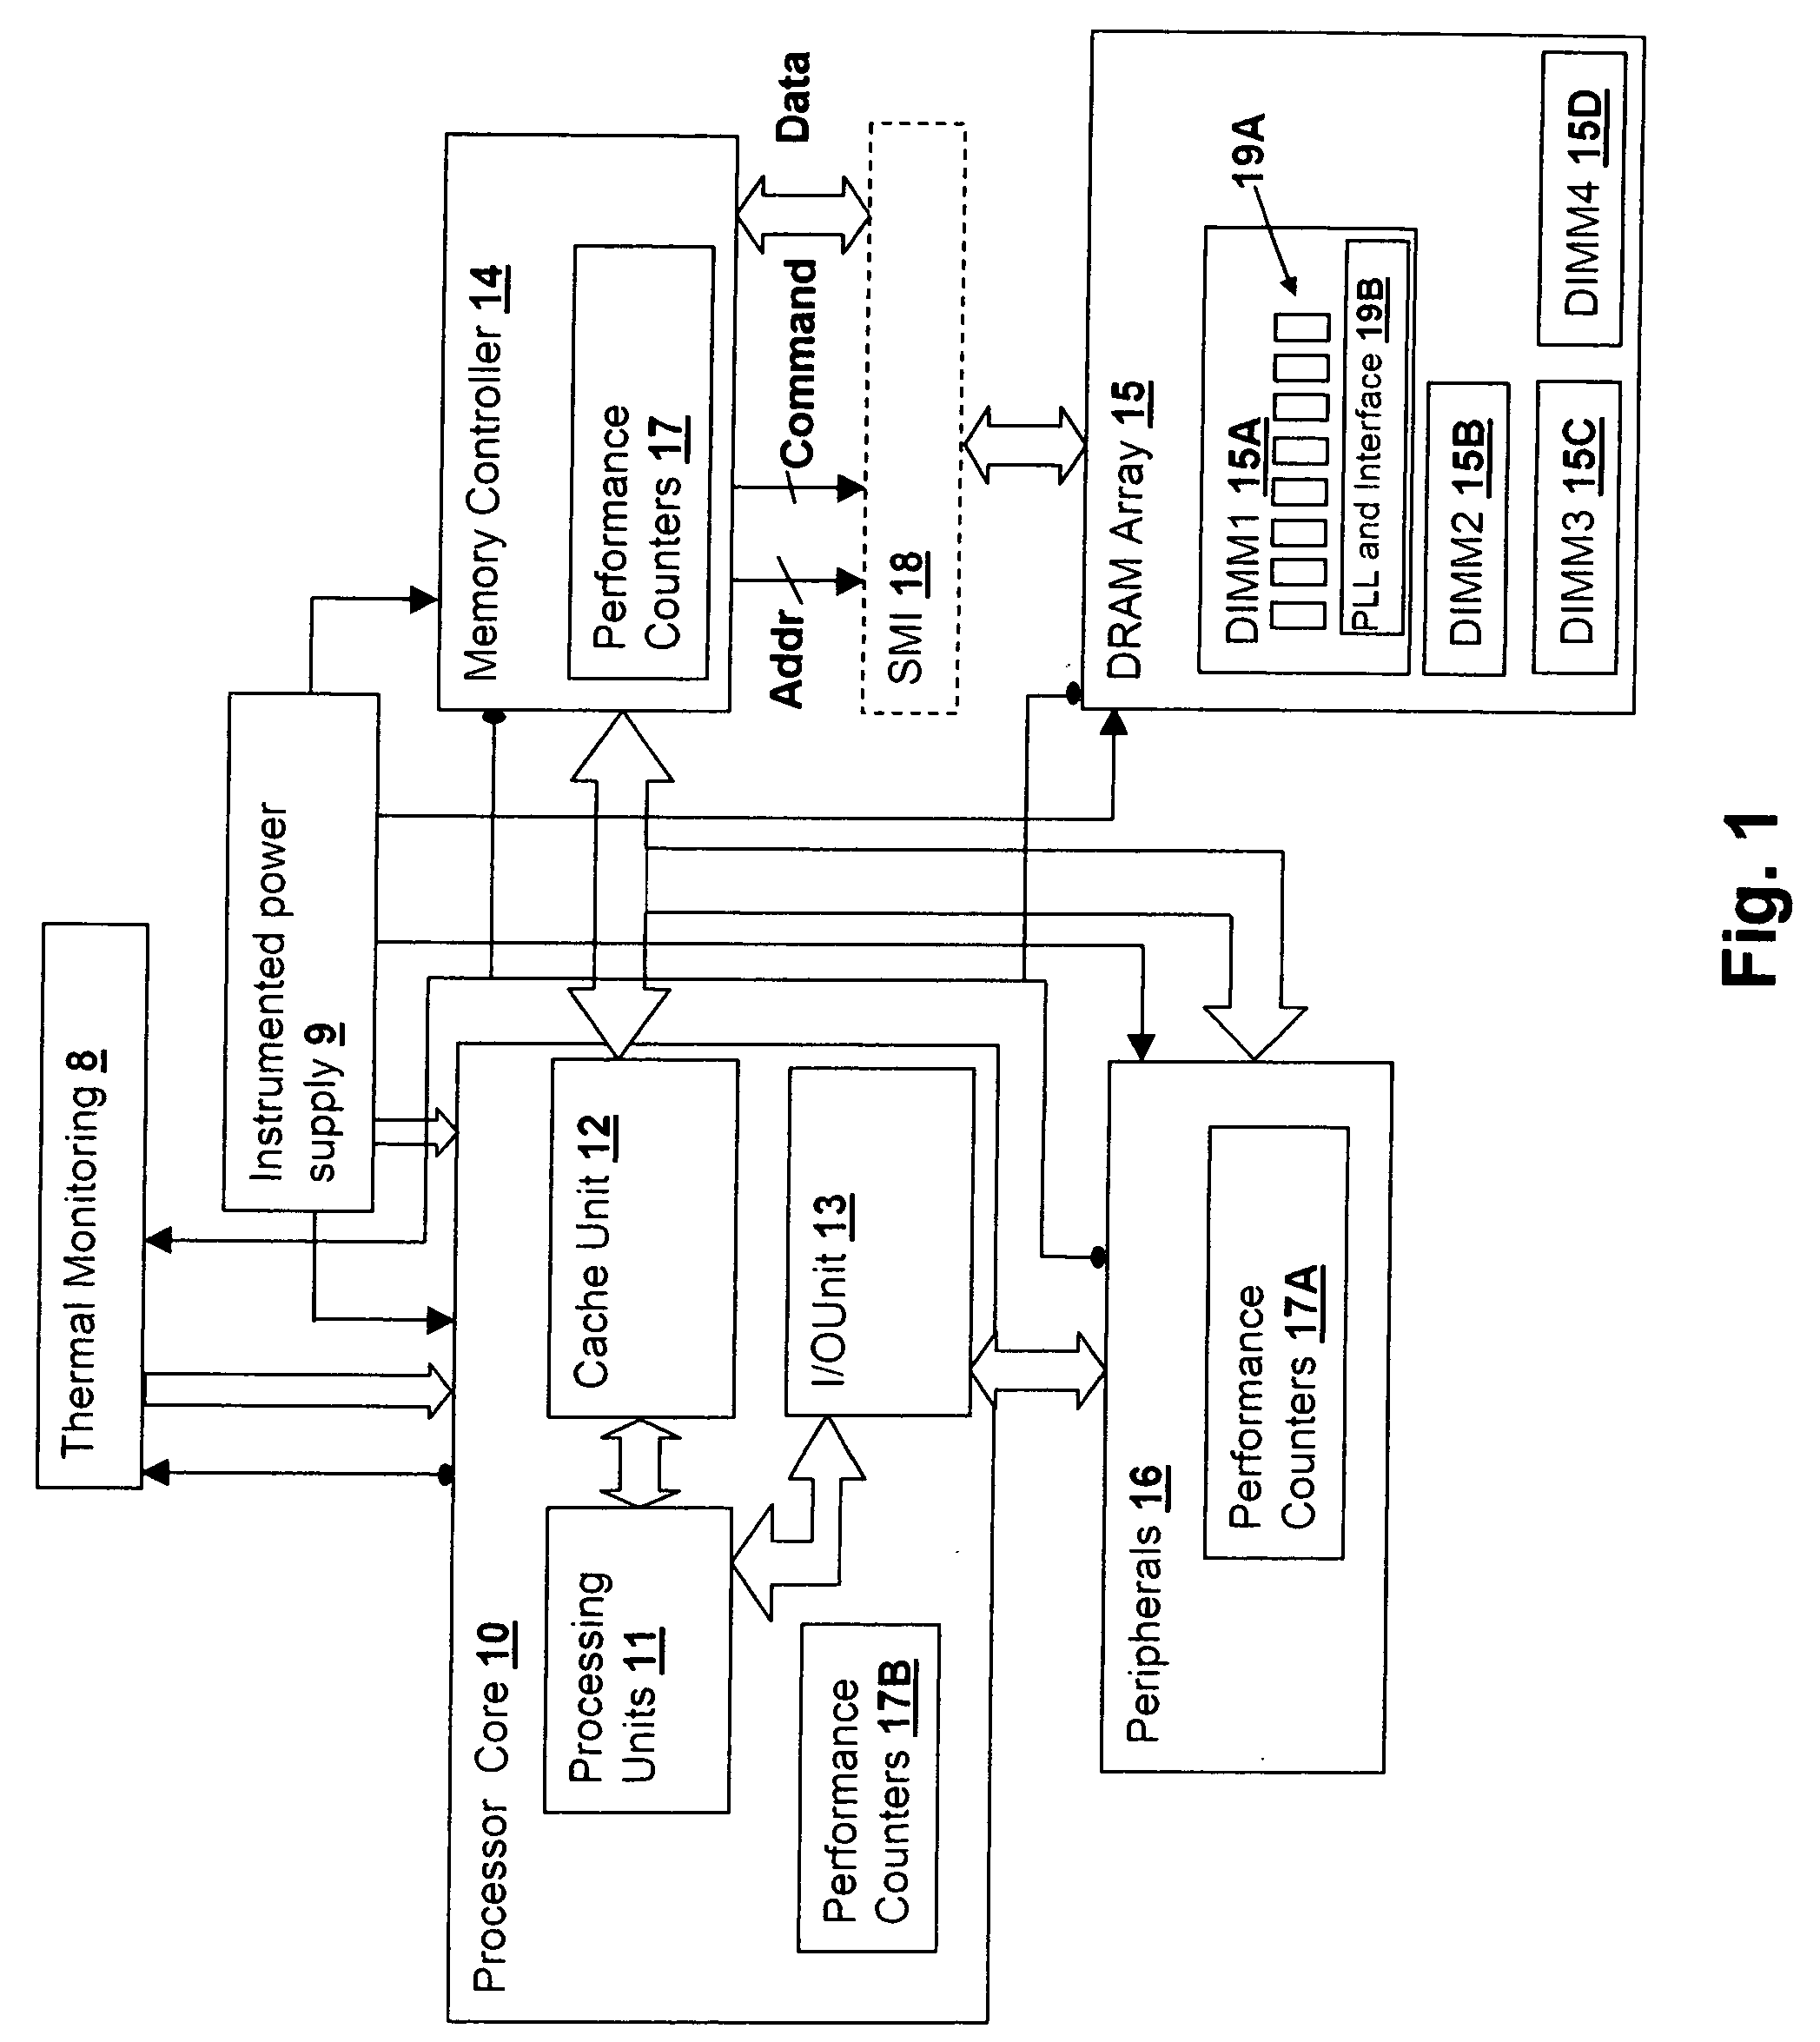 Method and system for energy management via energy-aware process scheduling